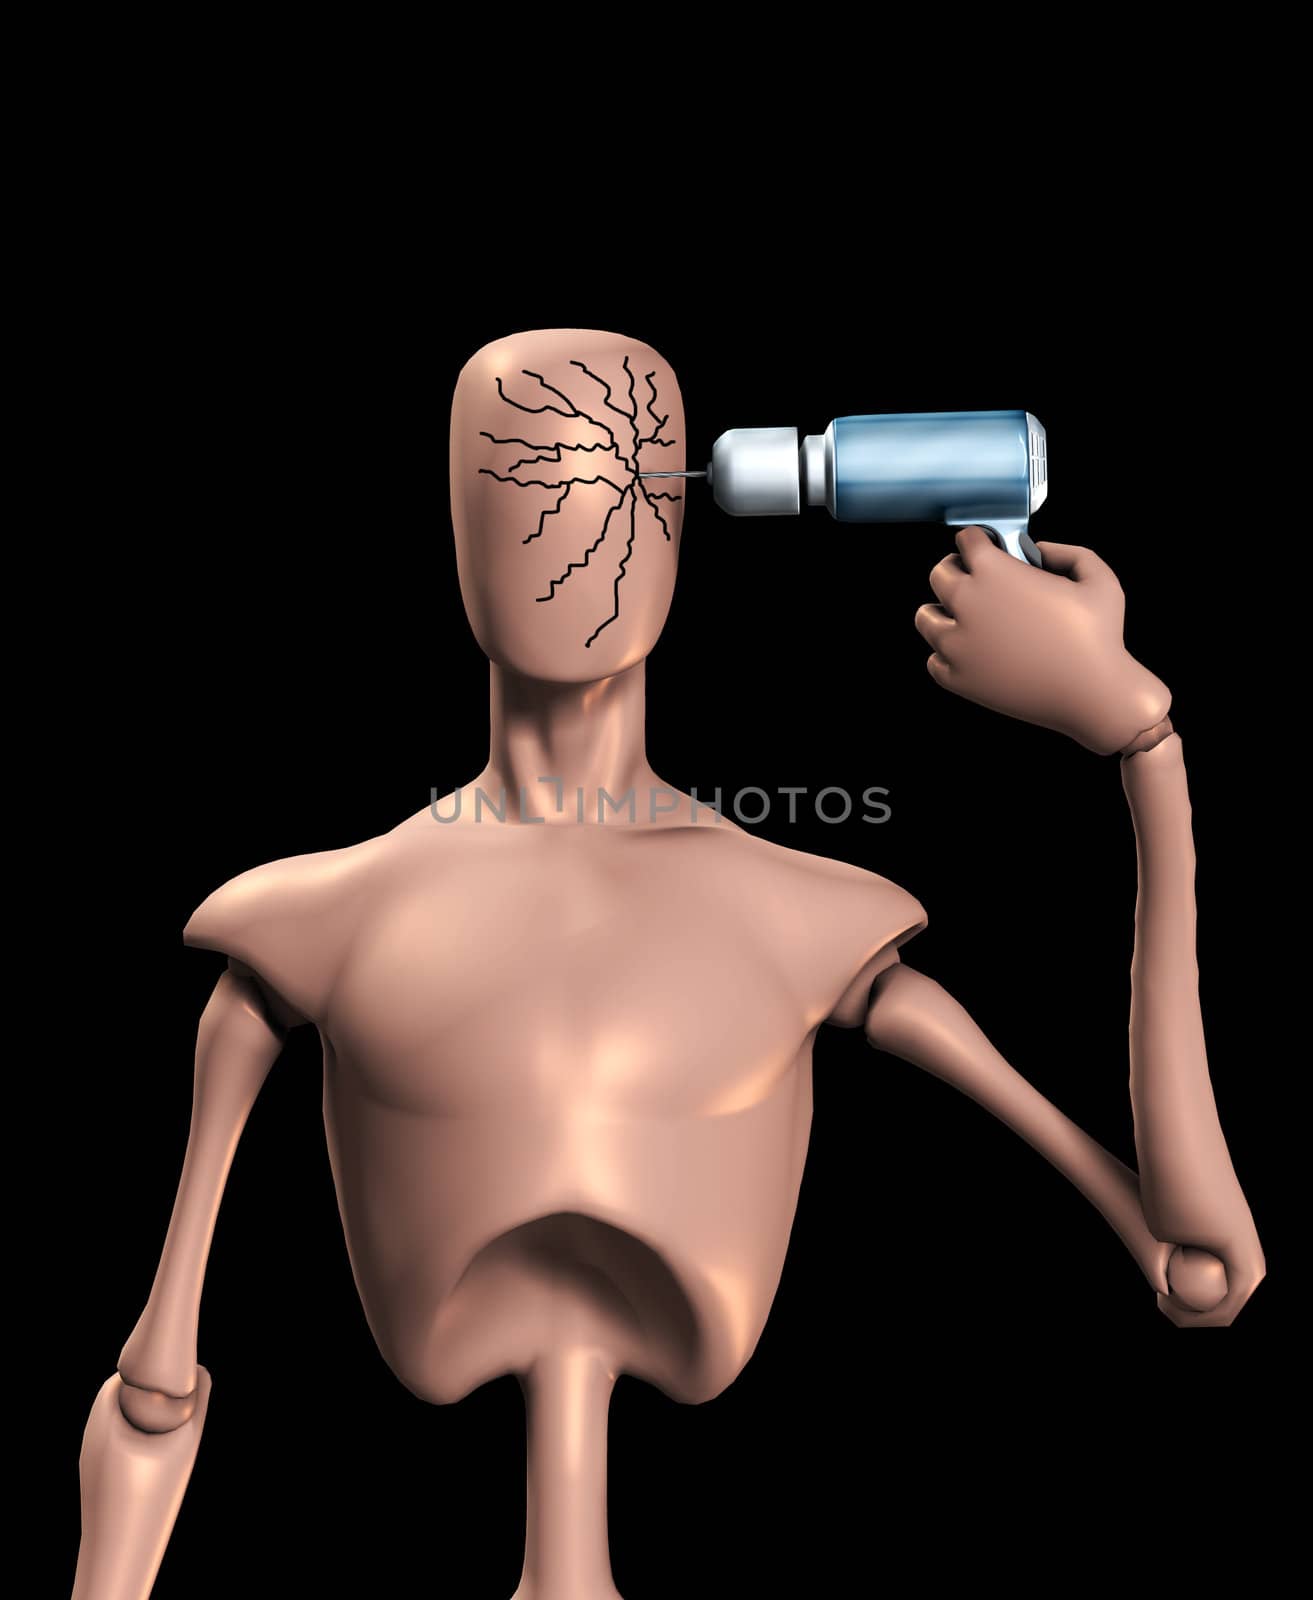 
Conceptual image showing a faceless figure drilling and cracking its head.